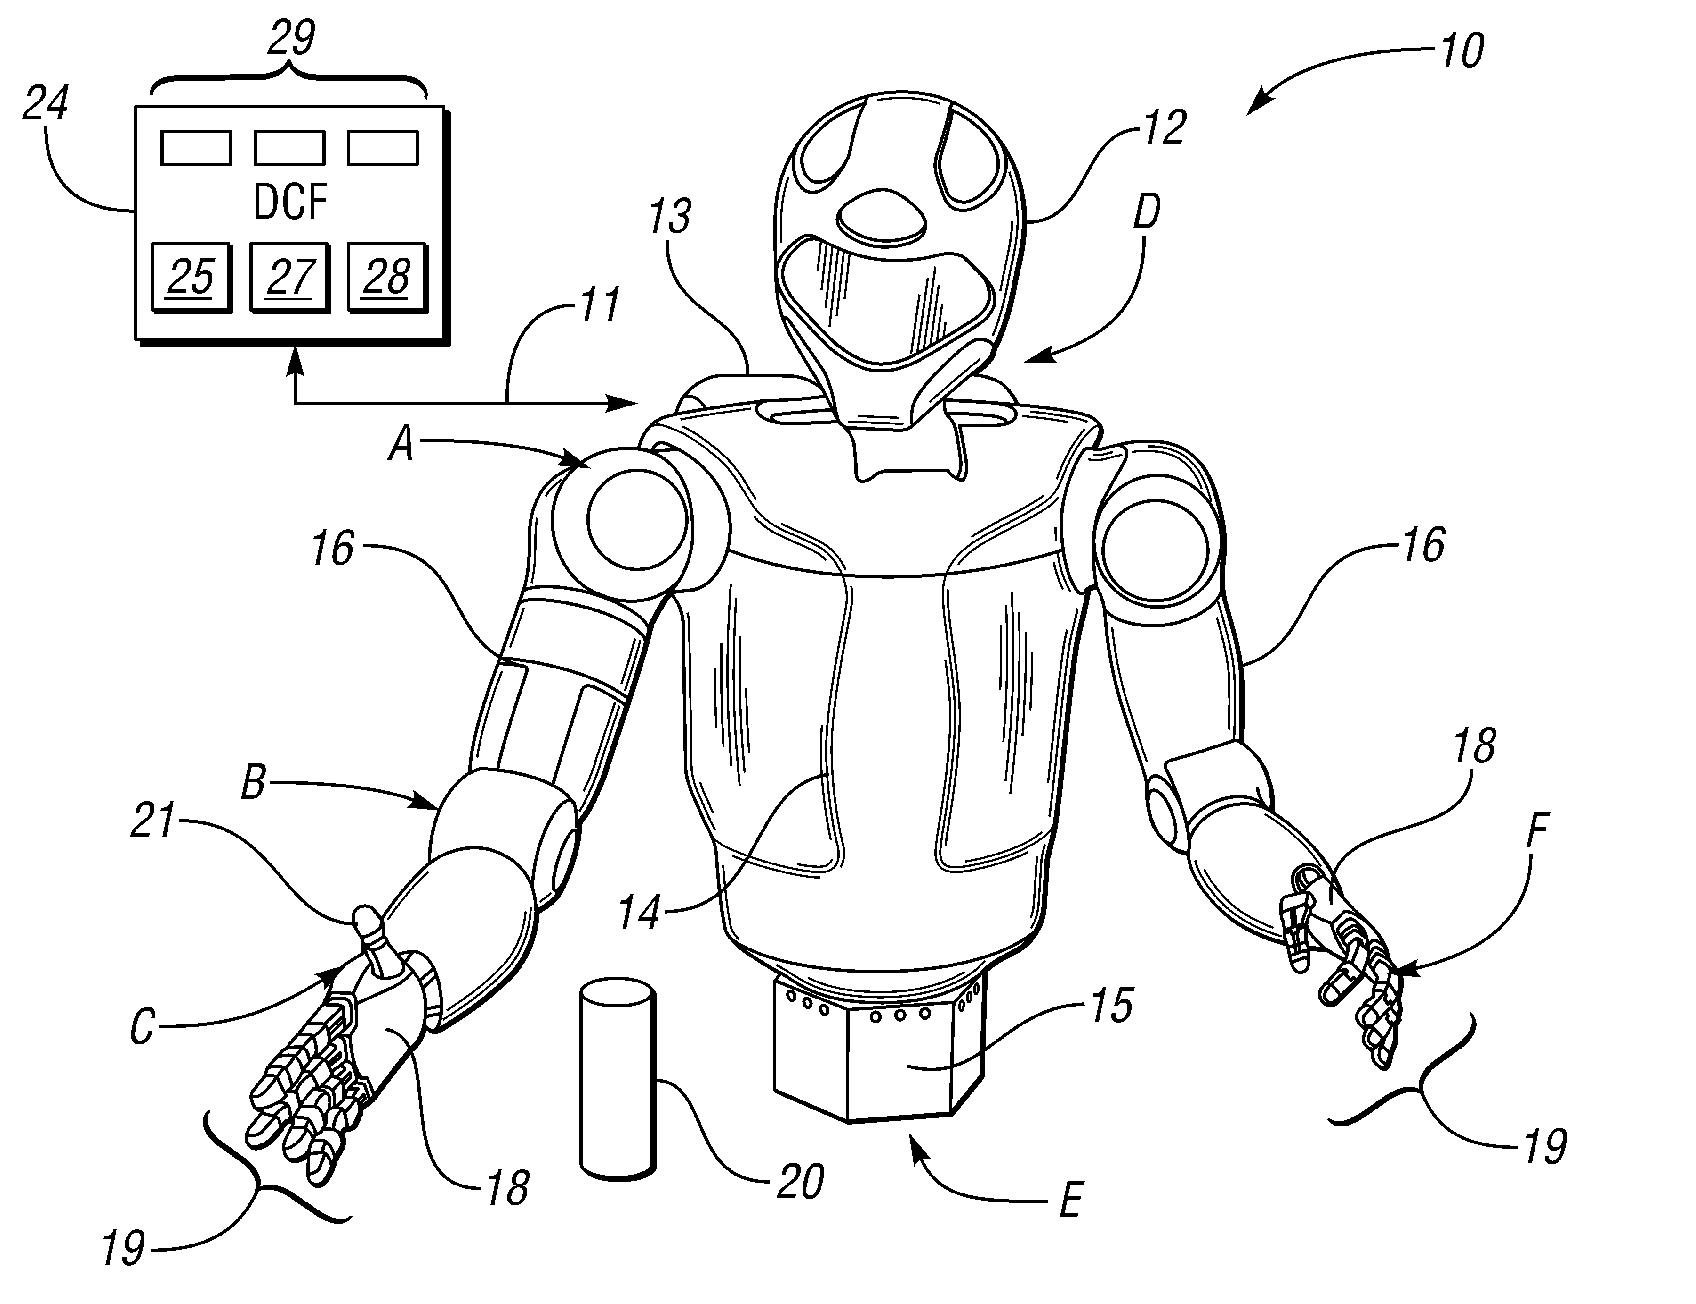 Framework and method for controlling a robotic system using a distributed computer network